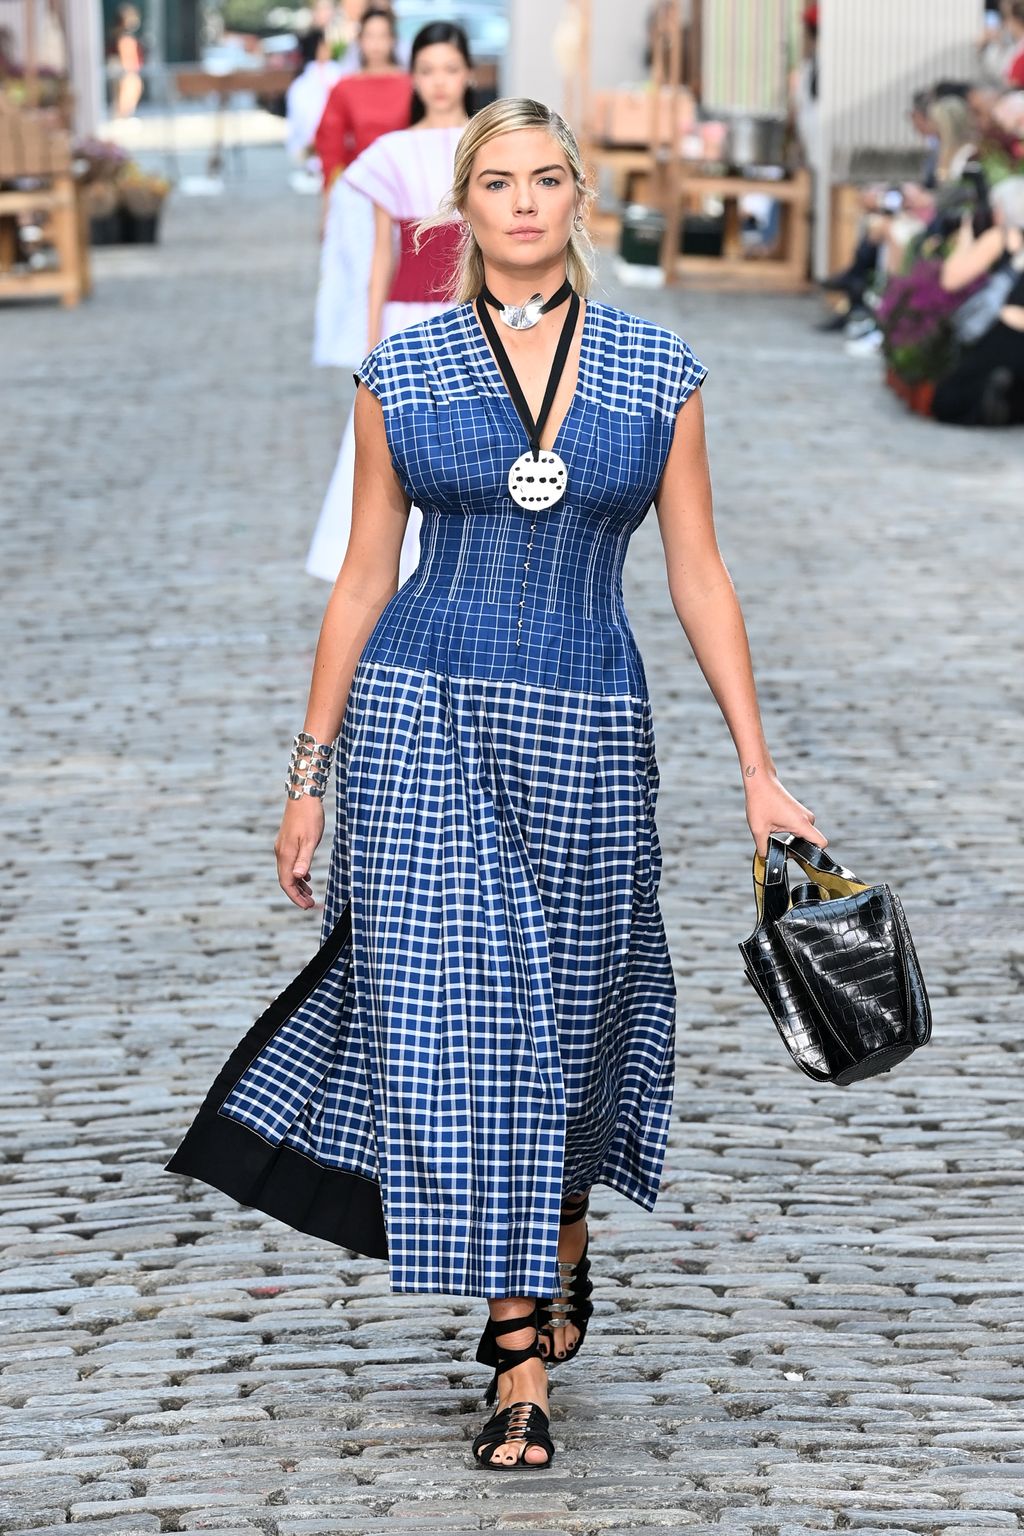 NEW YORK, NEW YORK - SEPTEMBER 12: Kate Upton walks the runway during the Tory Burch Spring/Summer 2022 Collection & Mercer Street Block Party on September 12, 2021 in New York City. (Photo by Slaven Vlasic/Getty Images for Tory Burch)